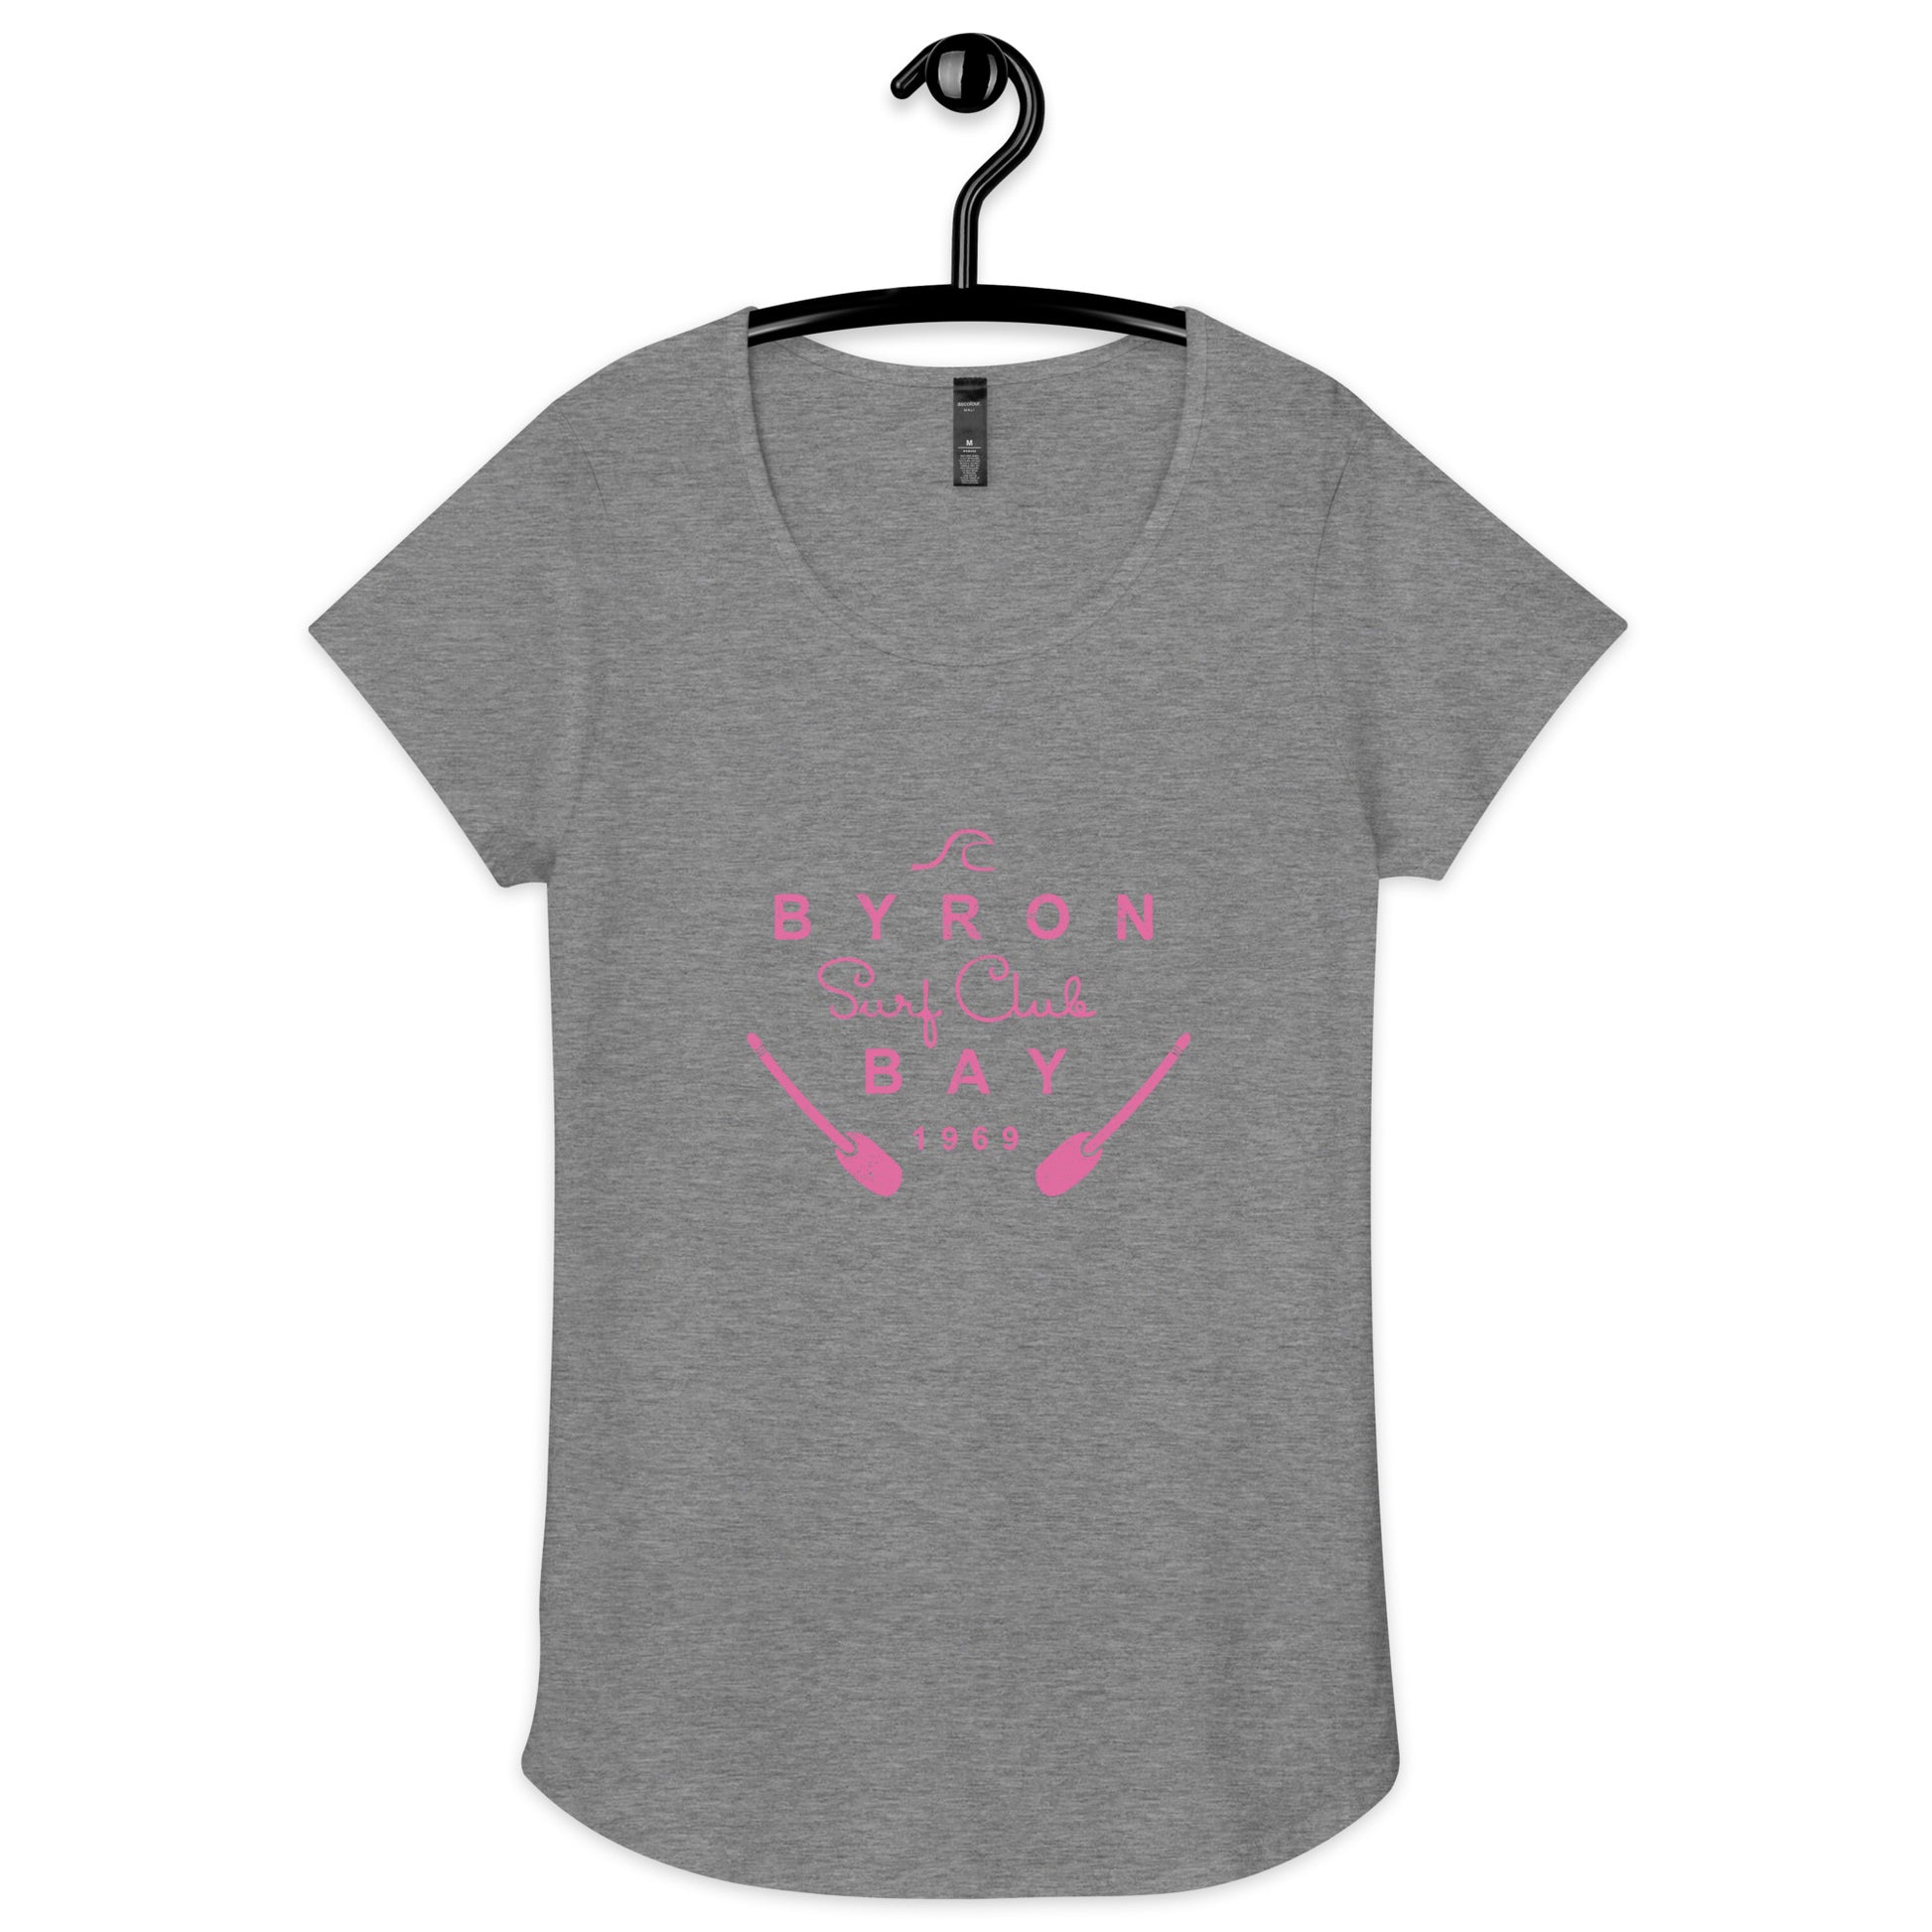  Women’s Round Neck Tee - grey marle - Front flat lay view - pink Byron Bay Surf Club logo on front - Genuine Byron Bay Merchandise | Produced by Go Sea Kayak Byron Bay 